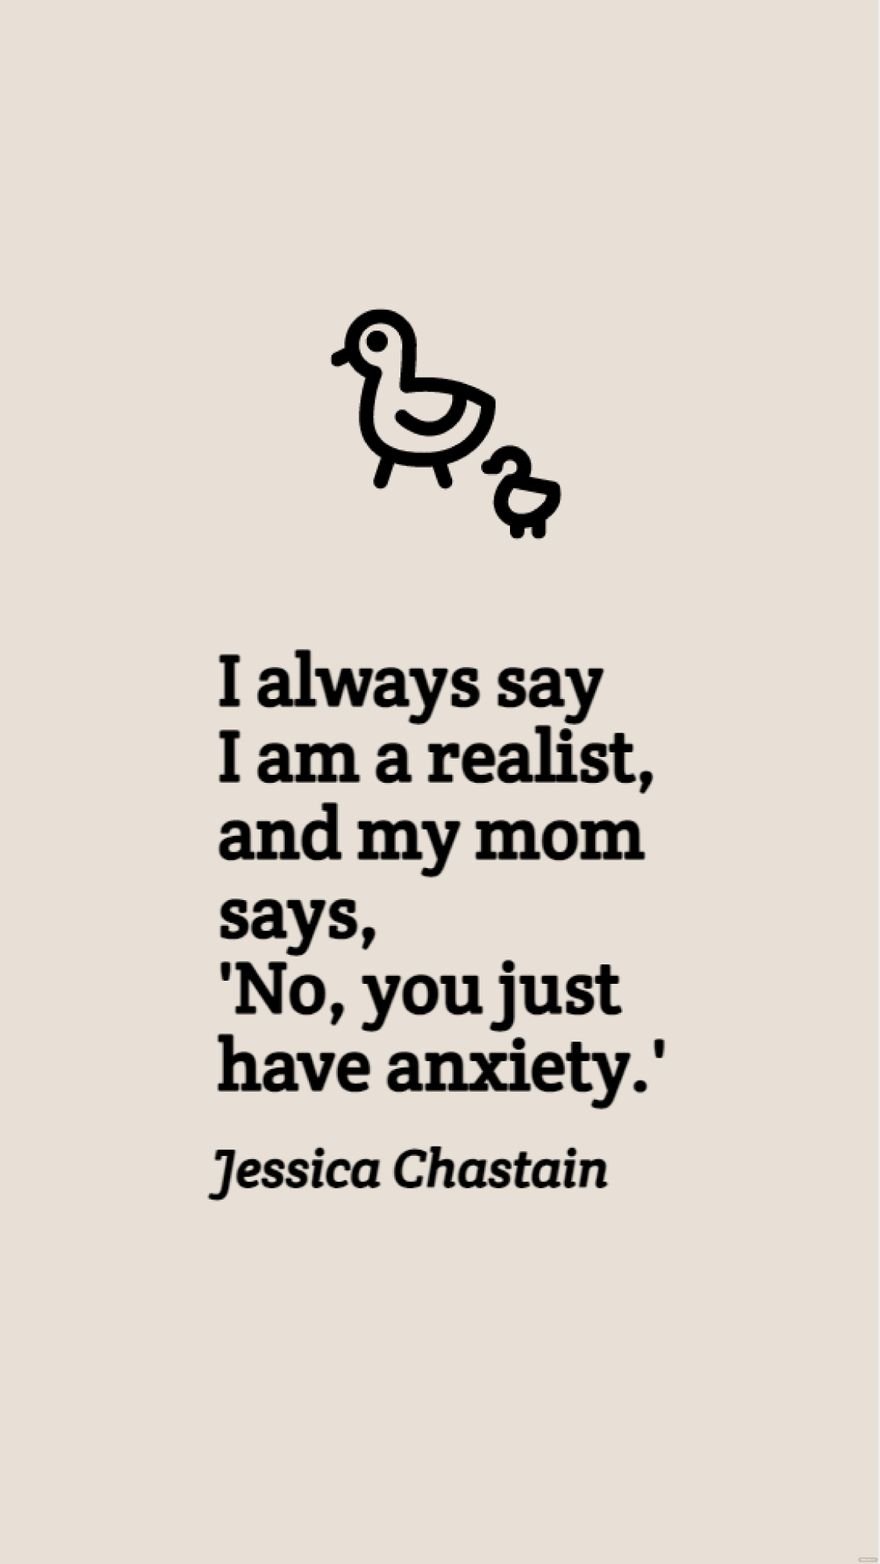 Free Jessica Chastain - I always say I am a realist, and my mom says, 'No, you just have anxiety.' in JPG